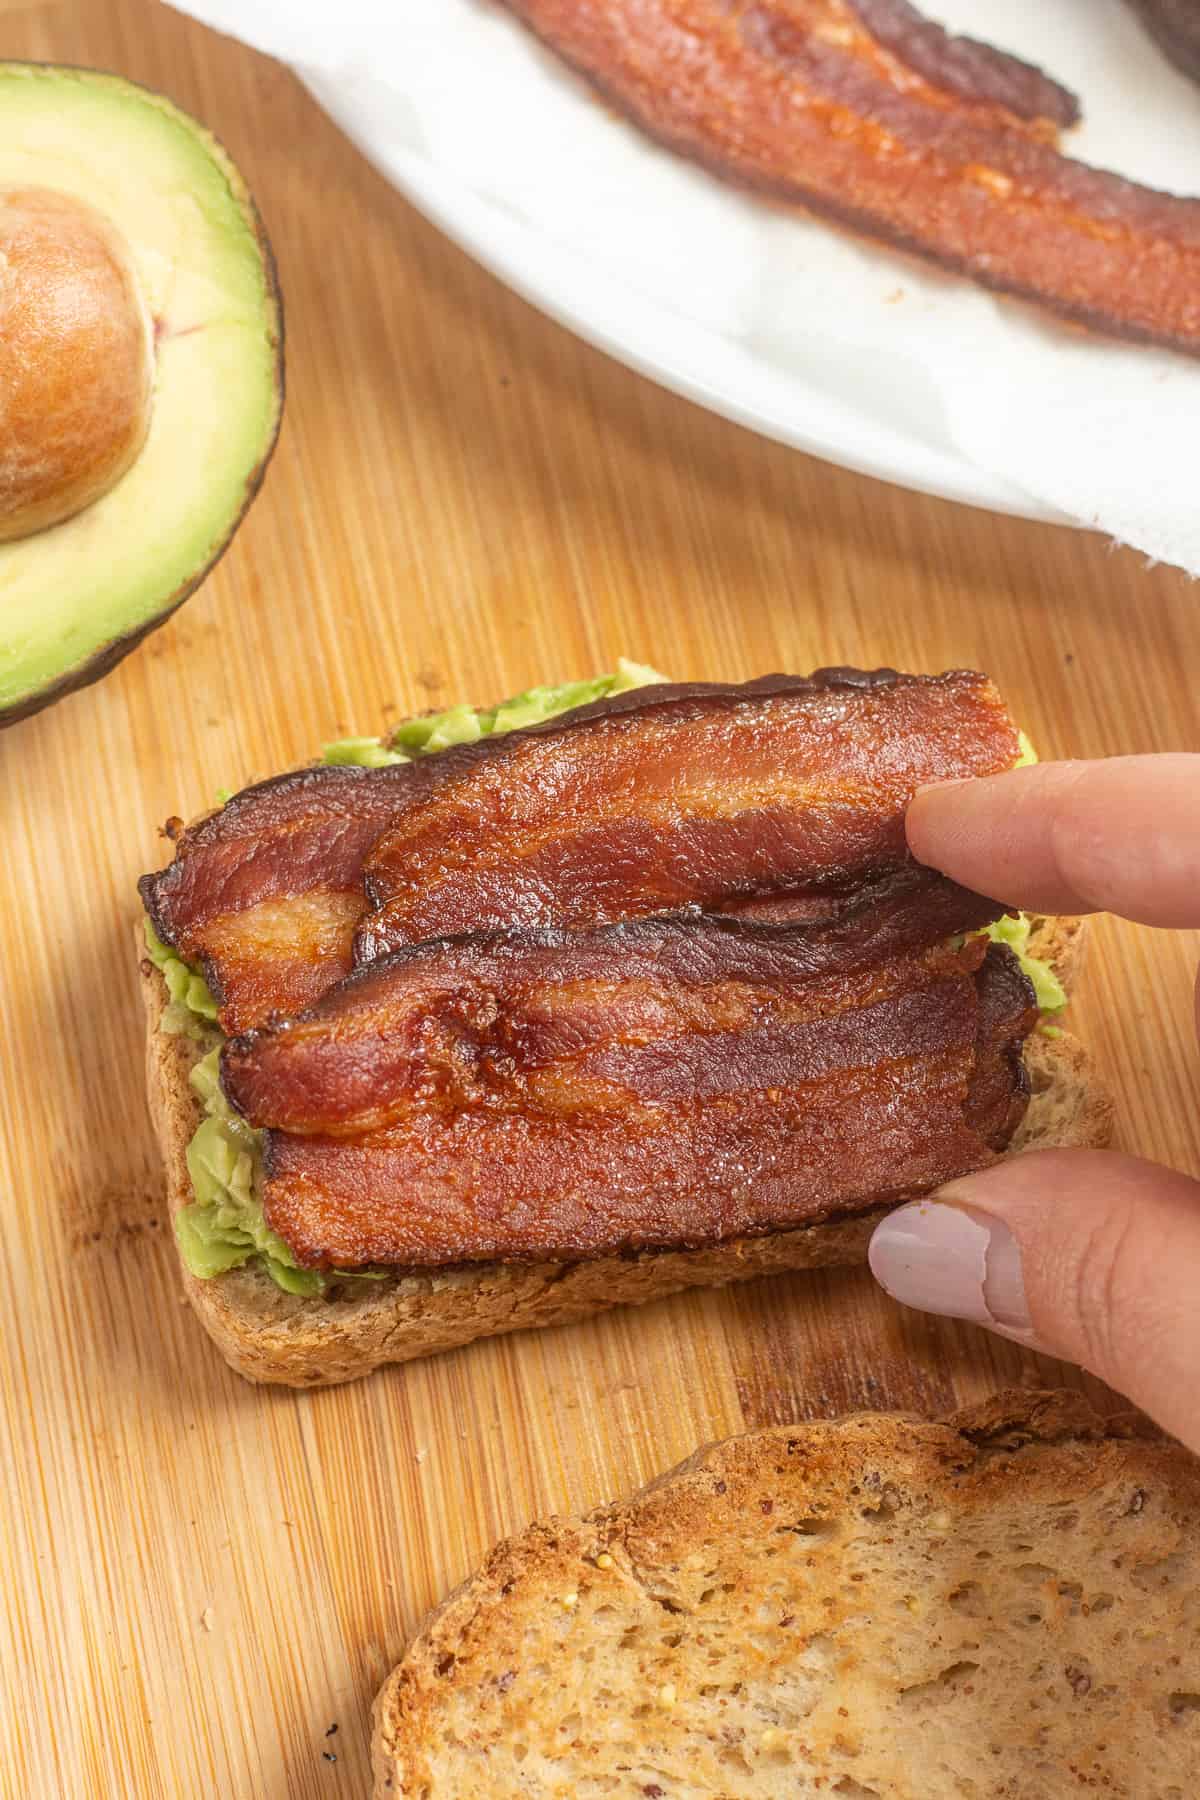 Placing slices of bacon on top of a piece of bread with avocado on it.